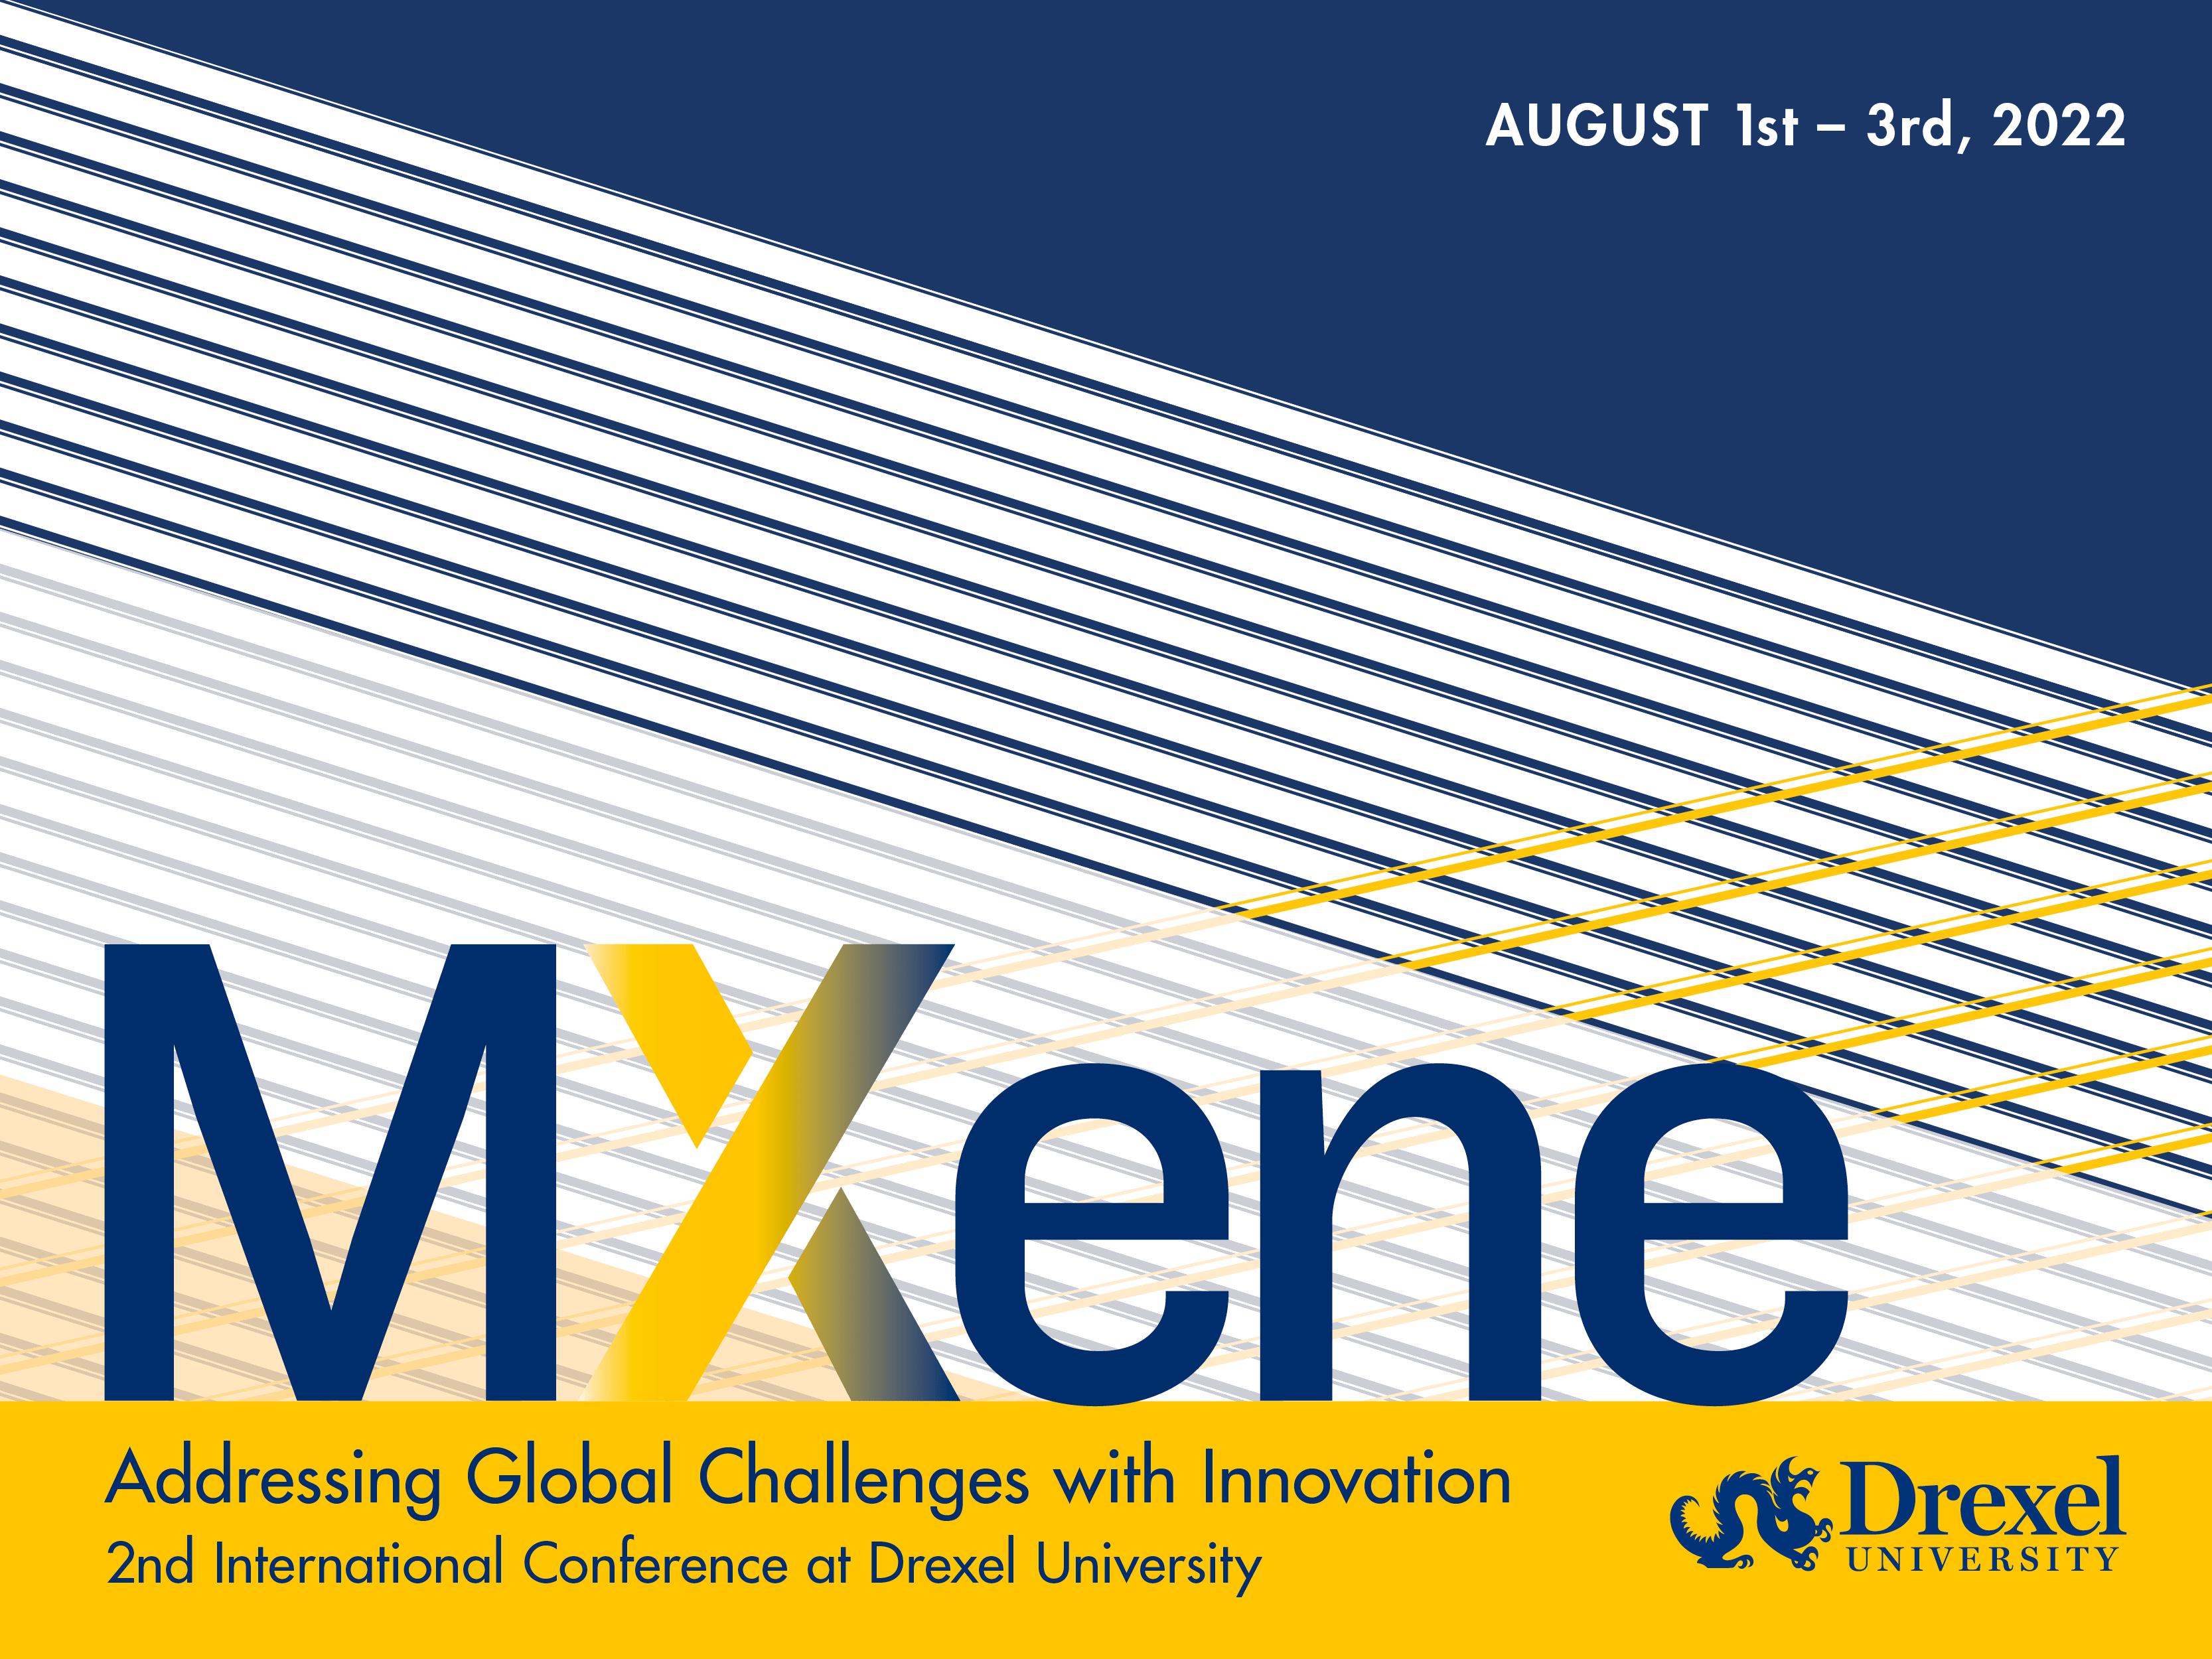 MXene Conference August 1 – 3, 2022